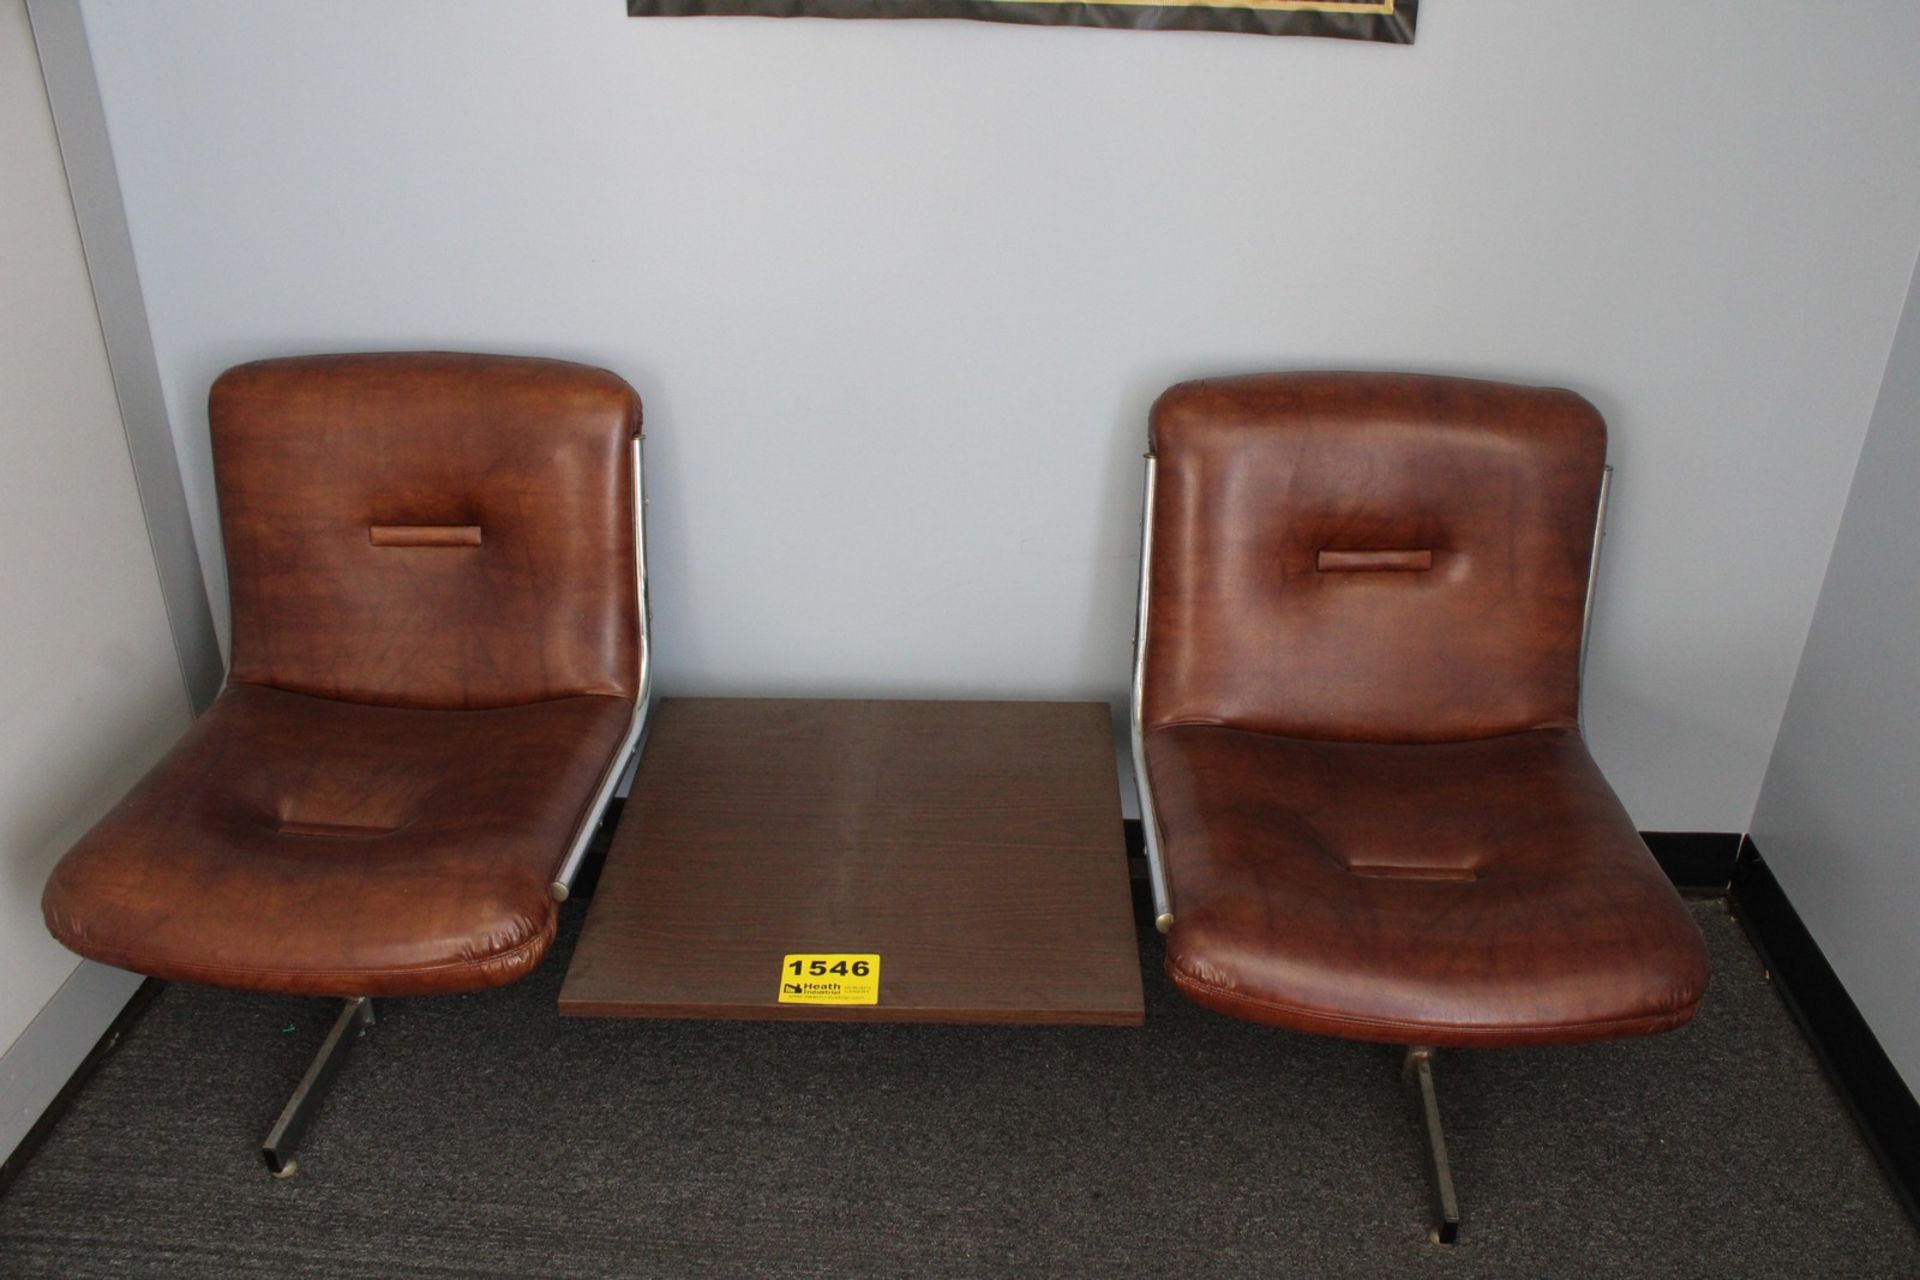 LOBBY CHAIRS WITH COMMON TABLE